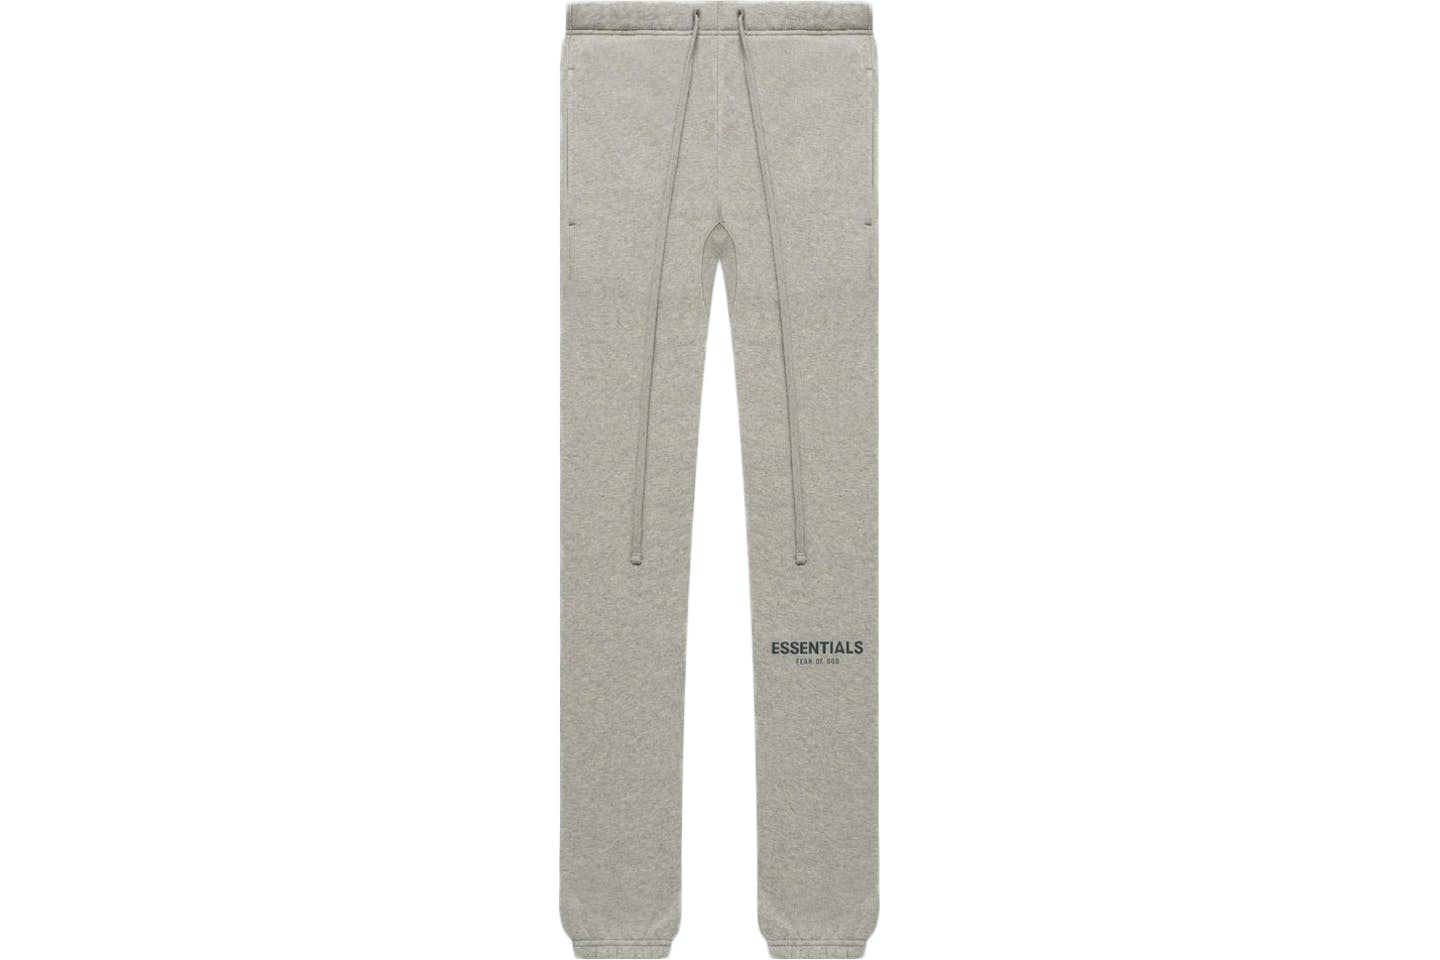 FEAR OF GOD ESSENTIALS CORE COLLECTION SWEATPANT DARK HEATHER OATMEAL FW21